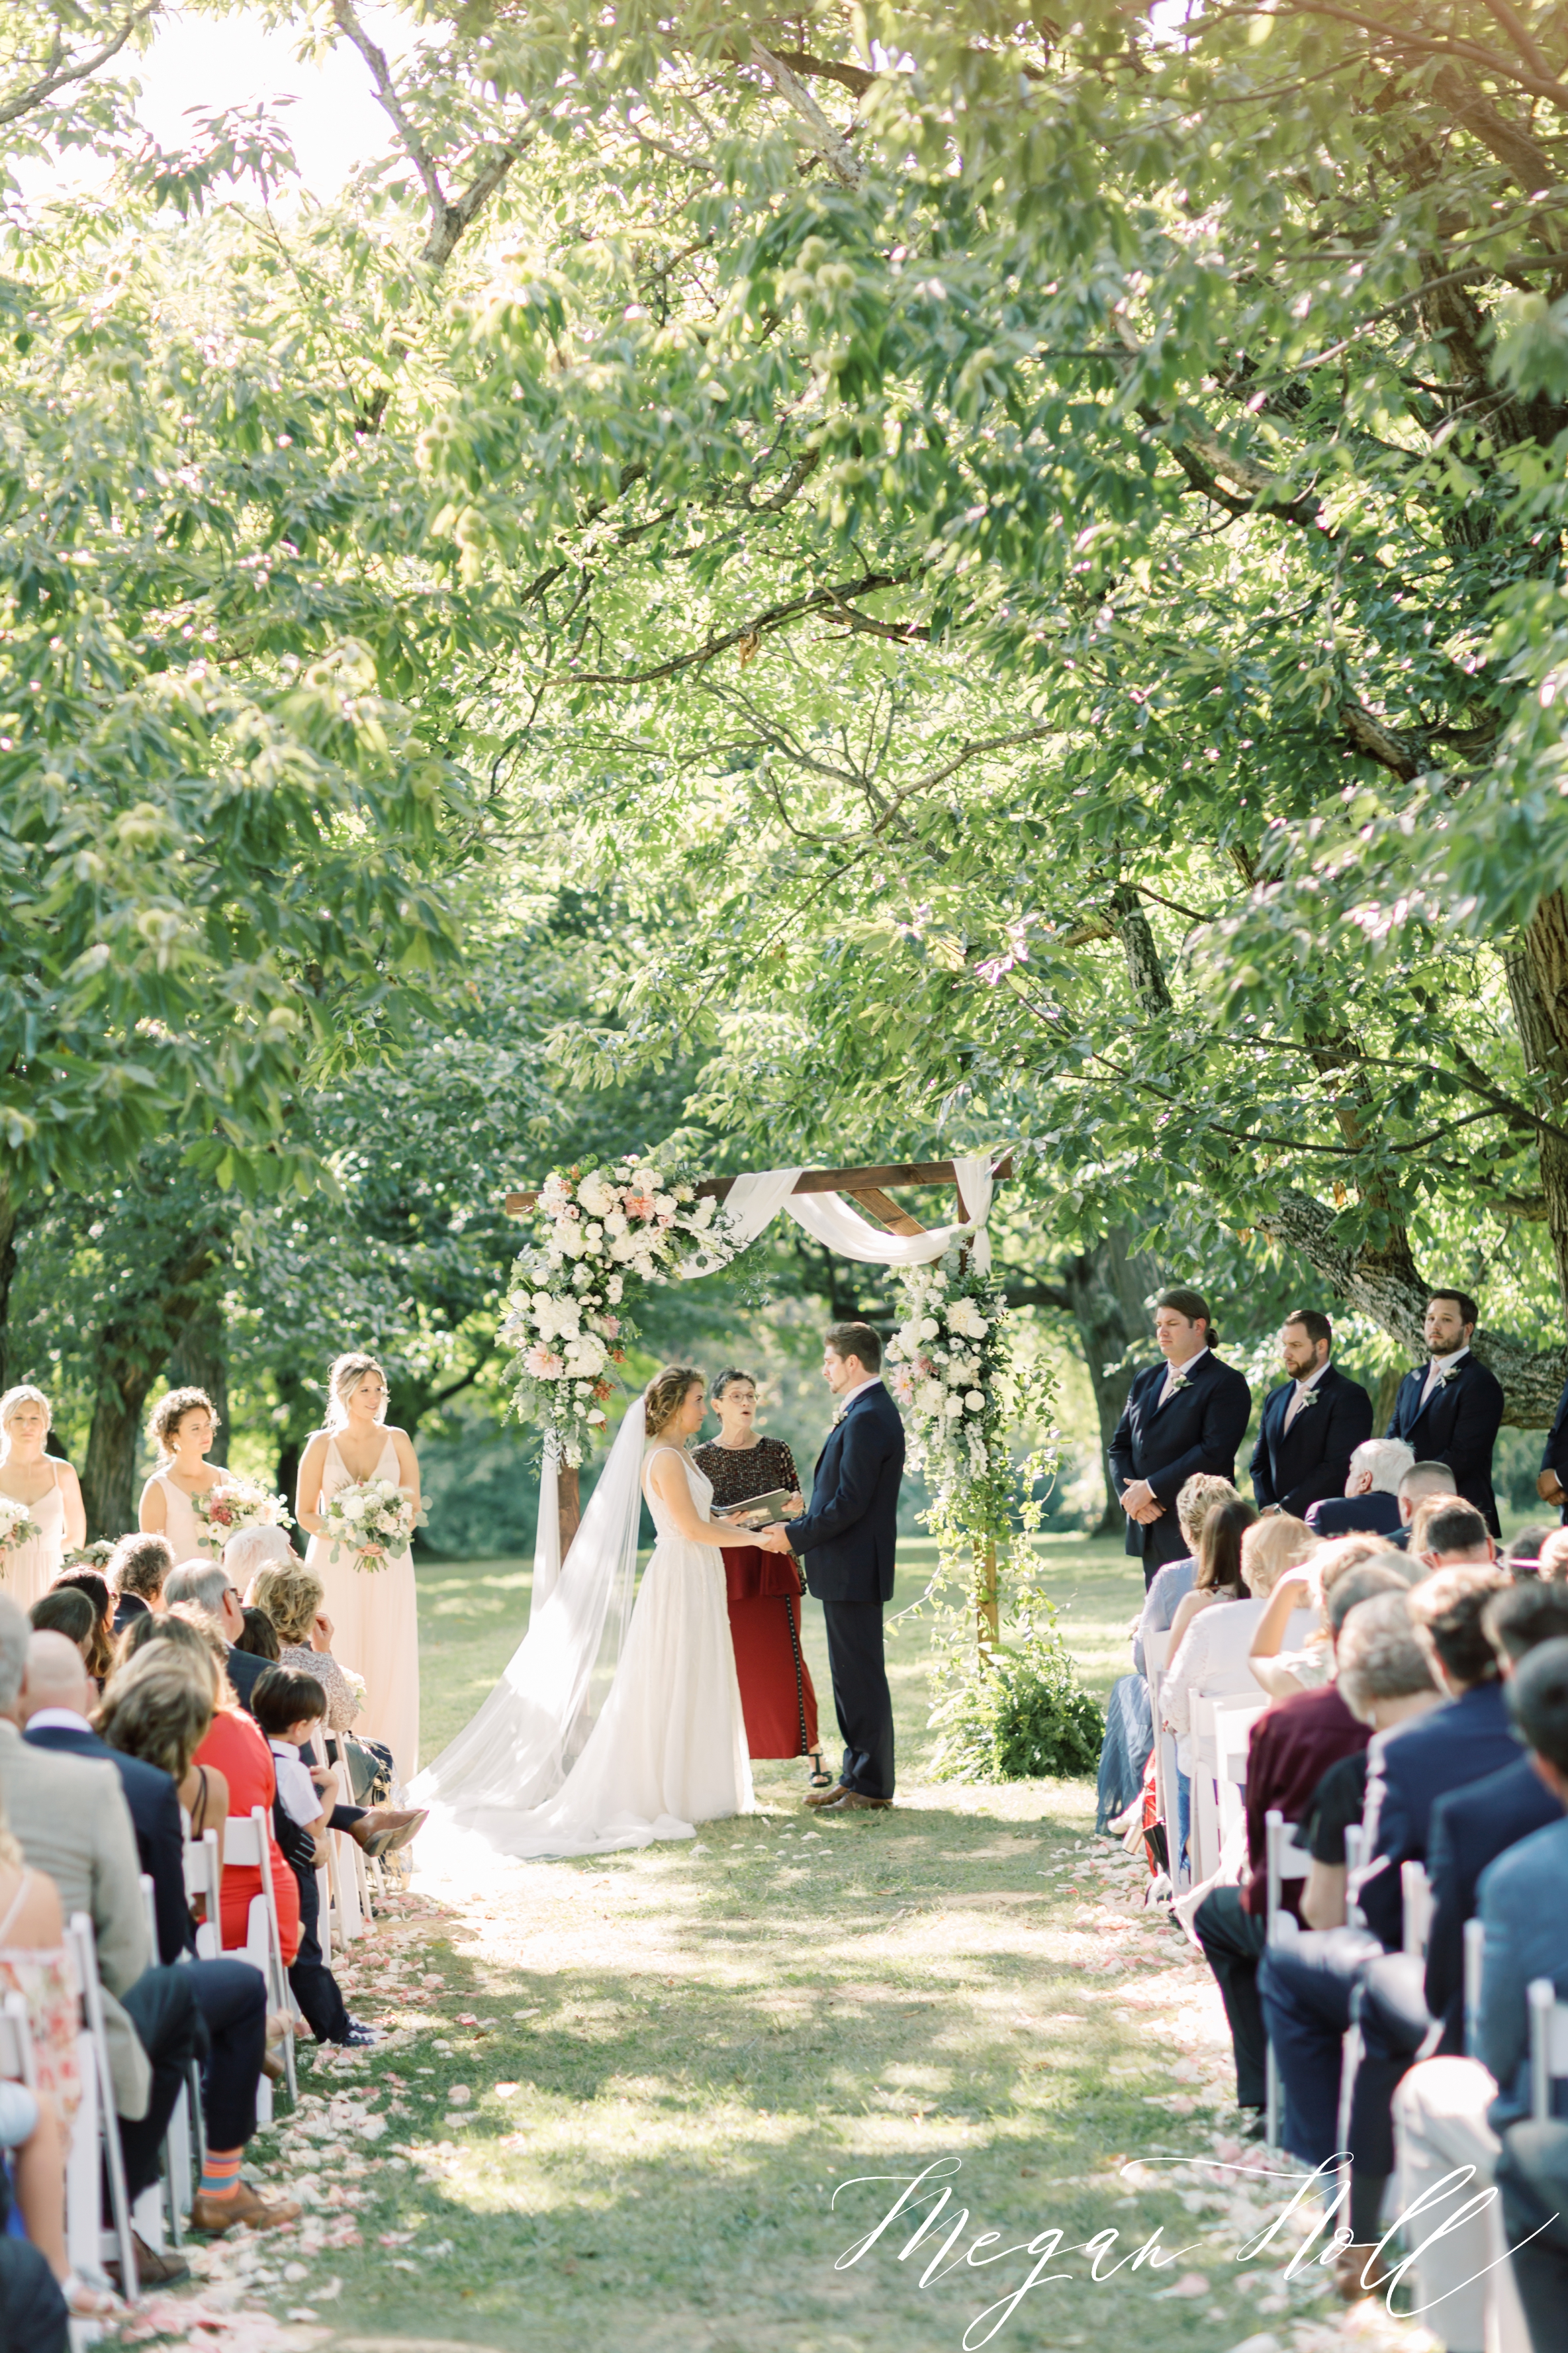 Wedding Ceremony at The Pinecroft Mansion in the Orchard